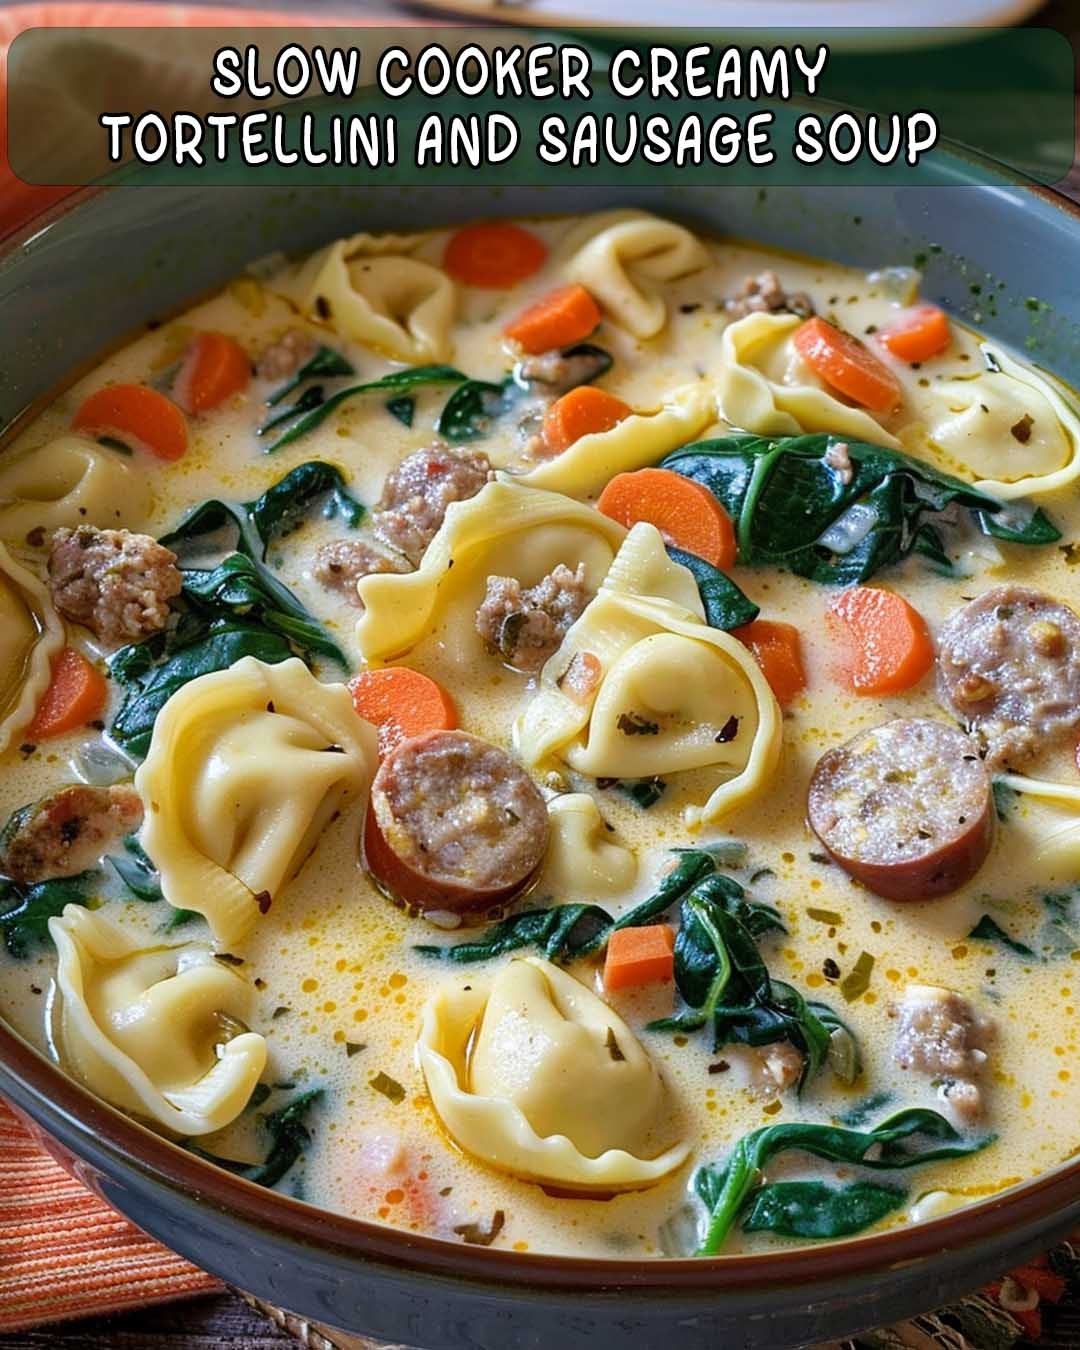 Slow Cooker Creamy Tortellini and Sausage Soup Recipe – Foodyhealthylife